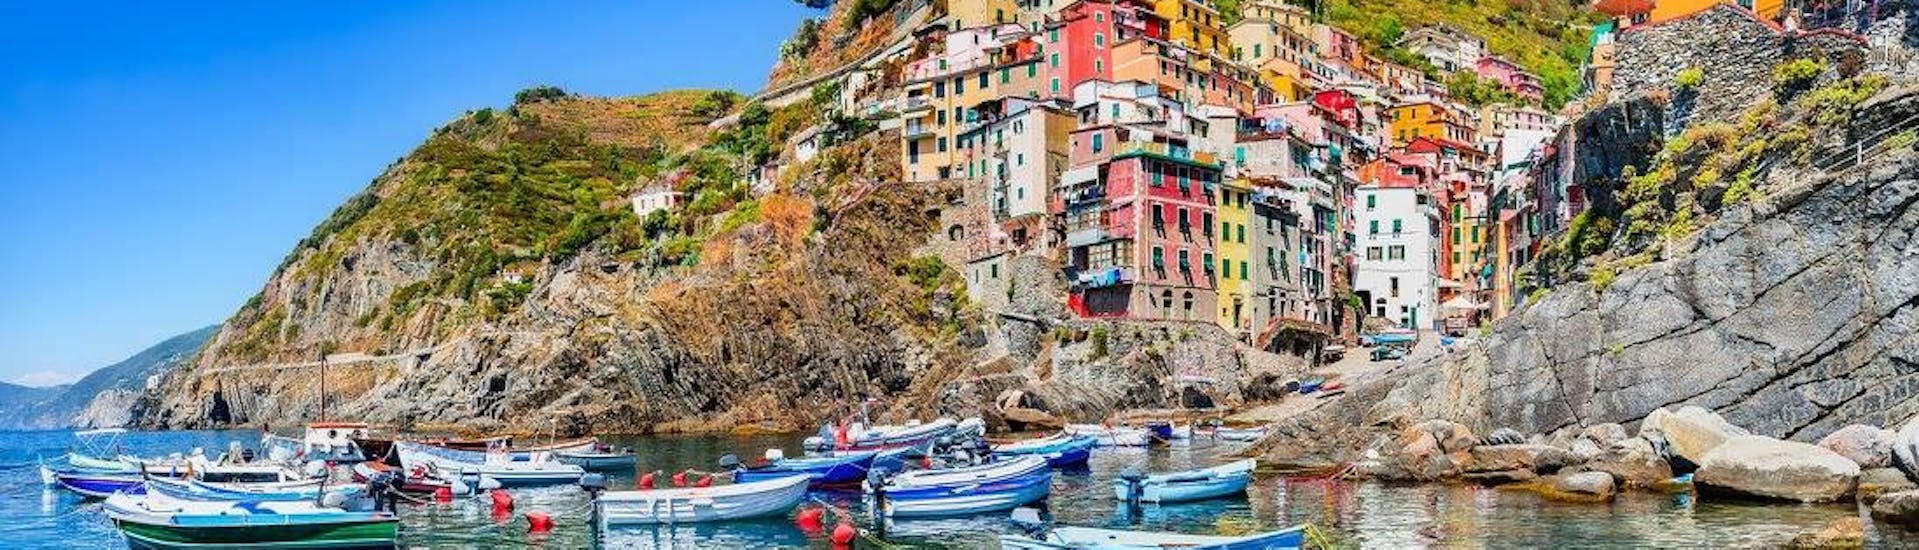 The great view that you can admire during a boat trip in Cinque Terre with Costa di Faraggiana Levanto.